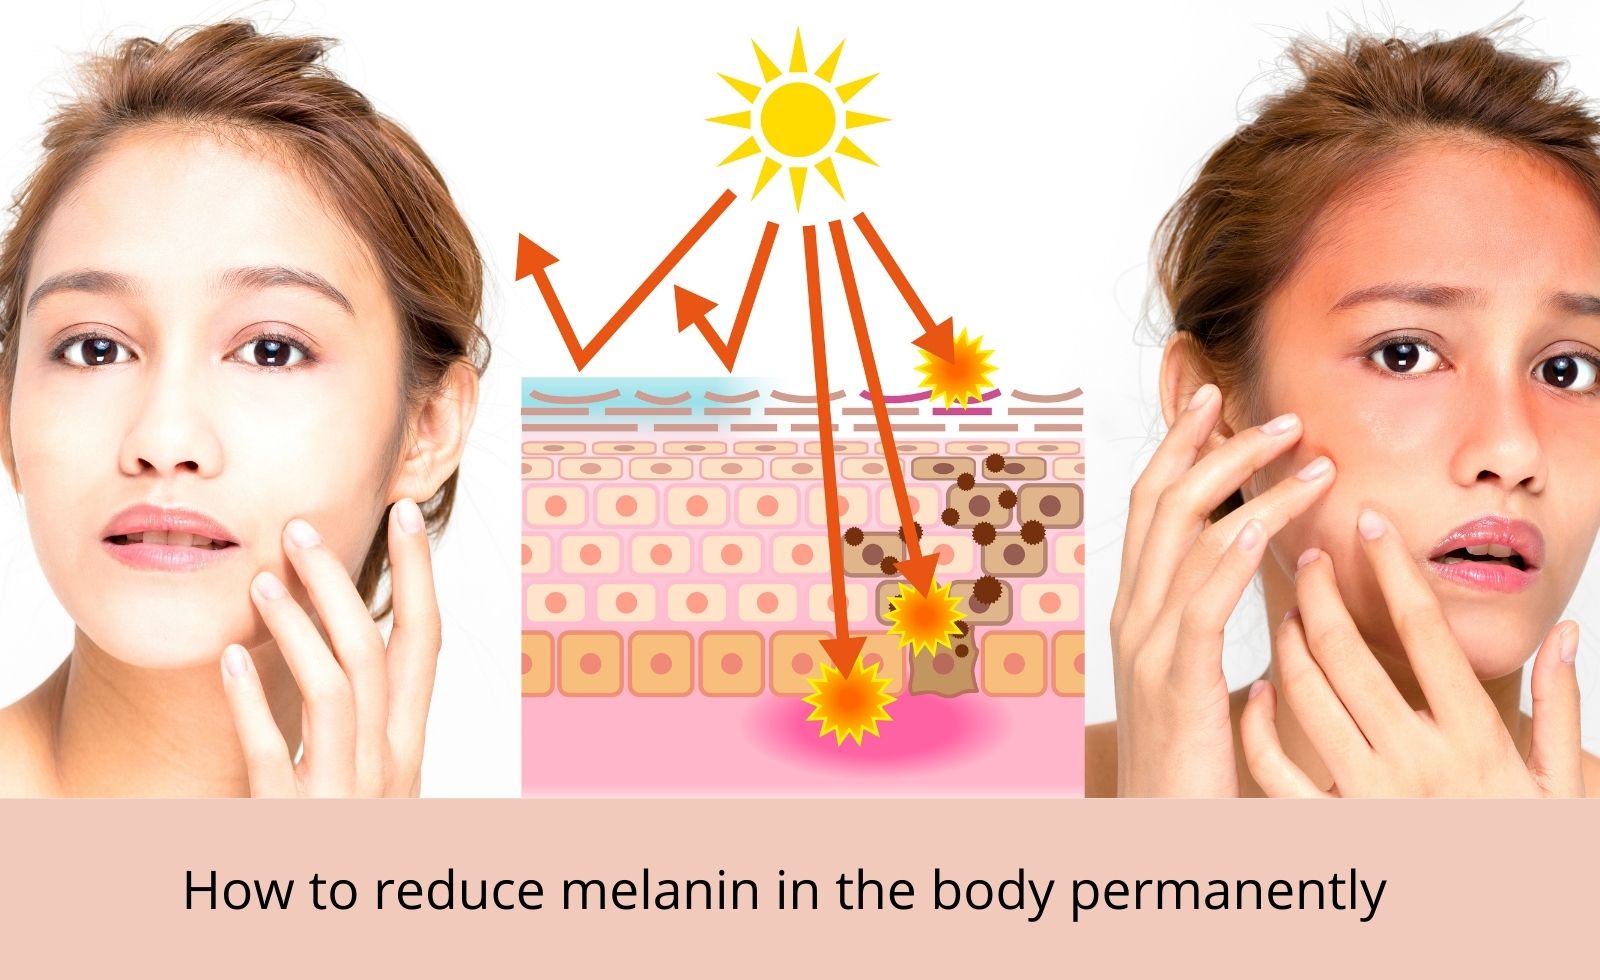 How to reduce melanin in the body permanently